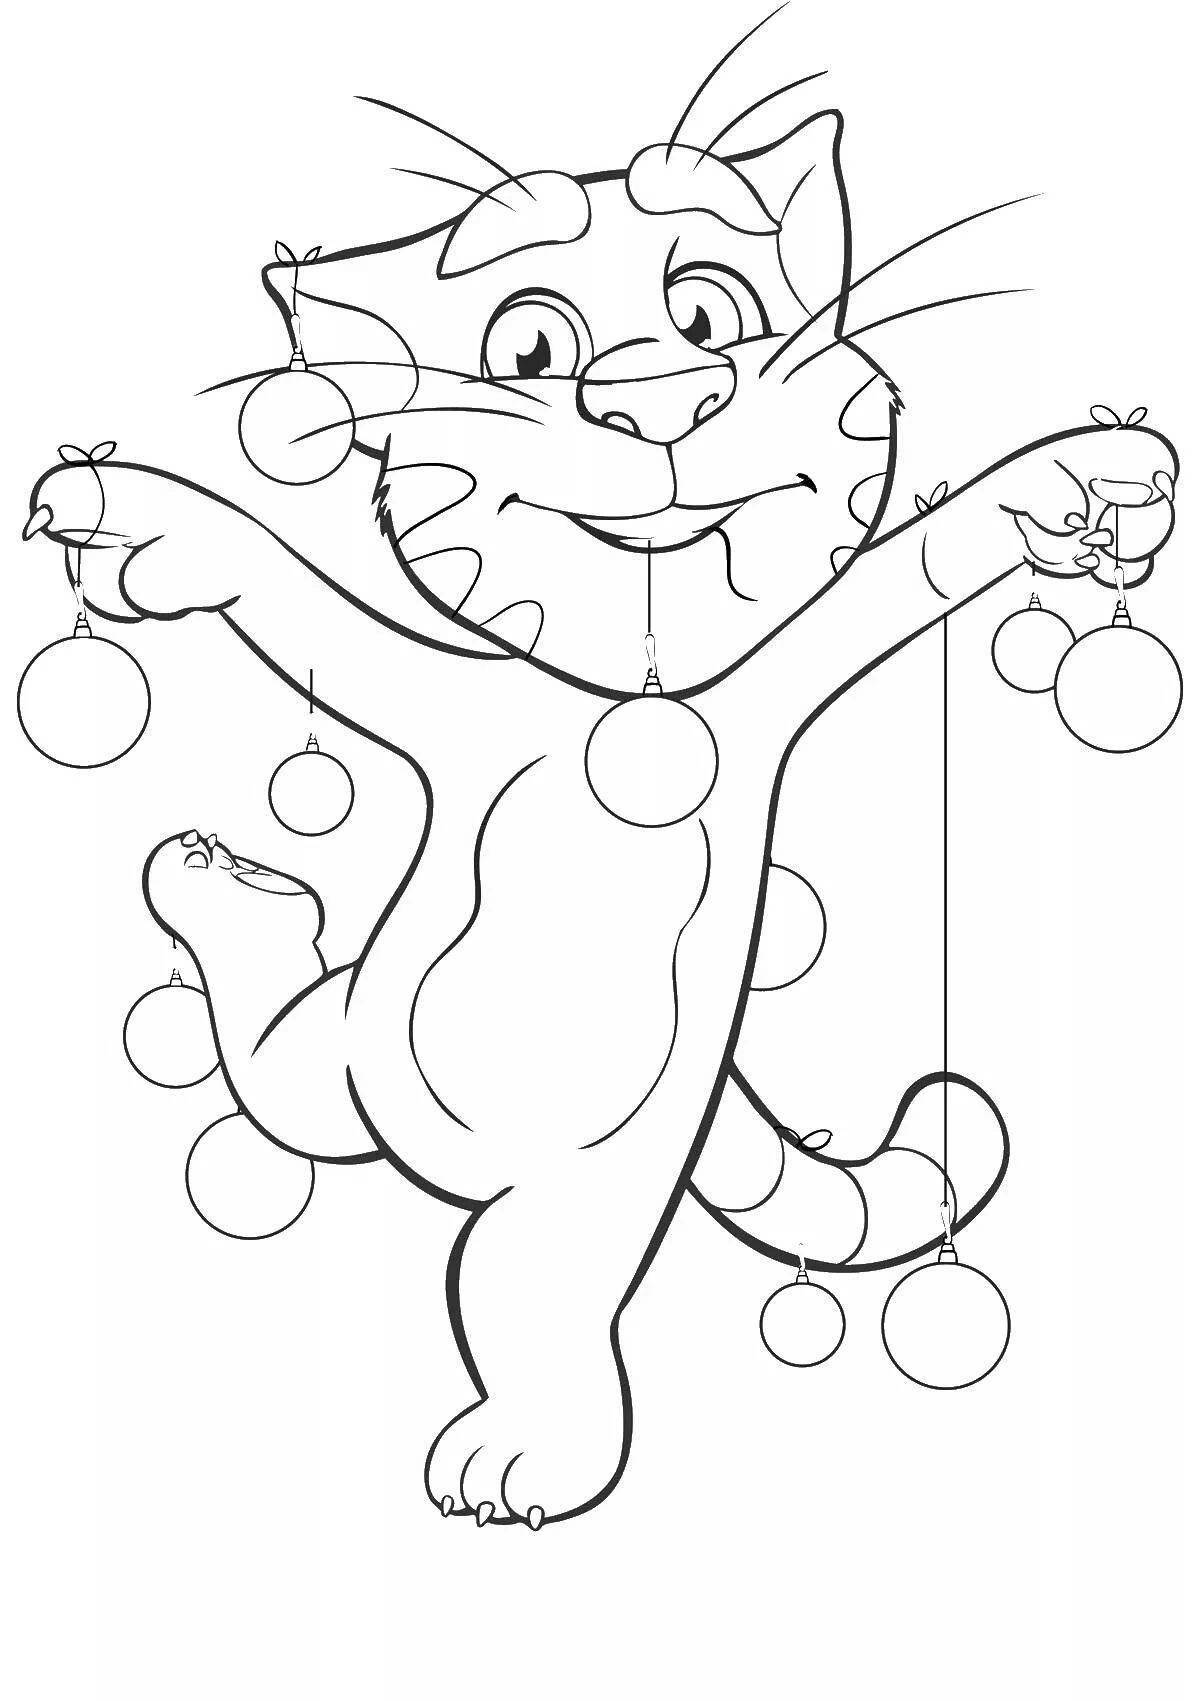 Glorious tom and angela coloring pages for kids